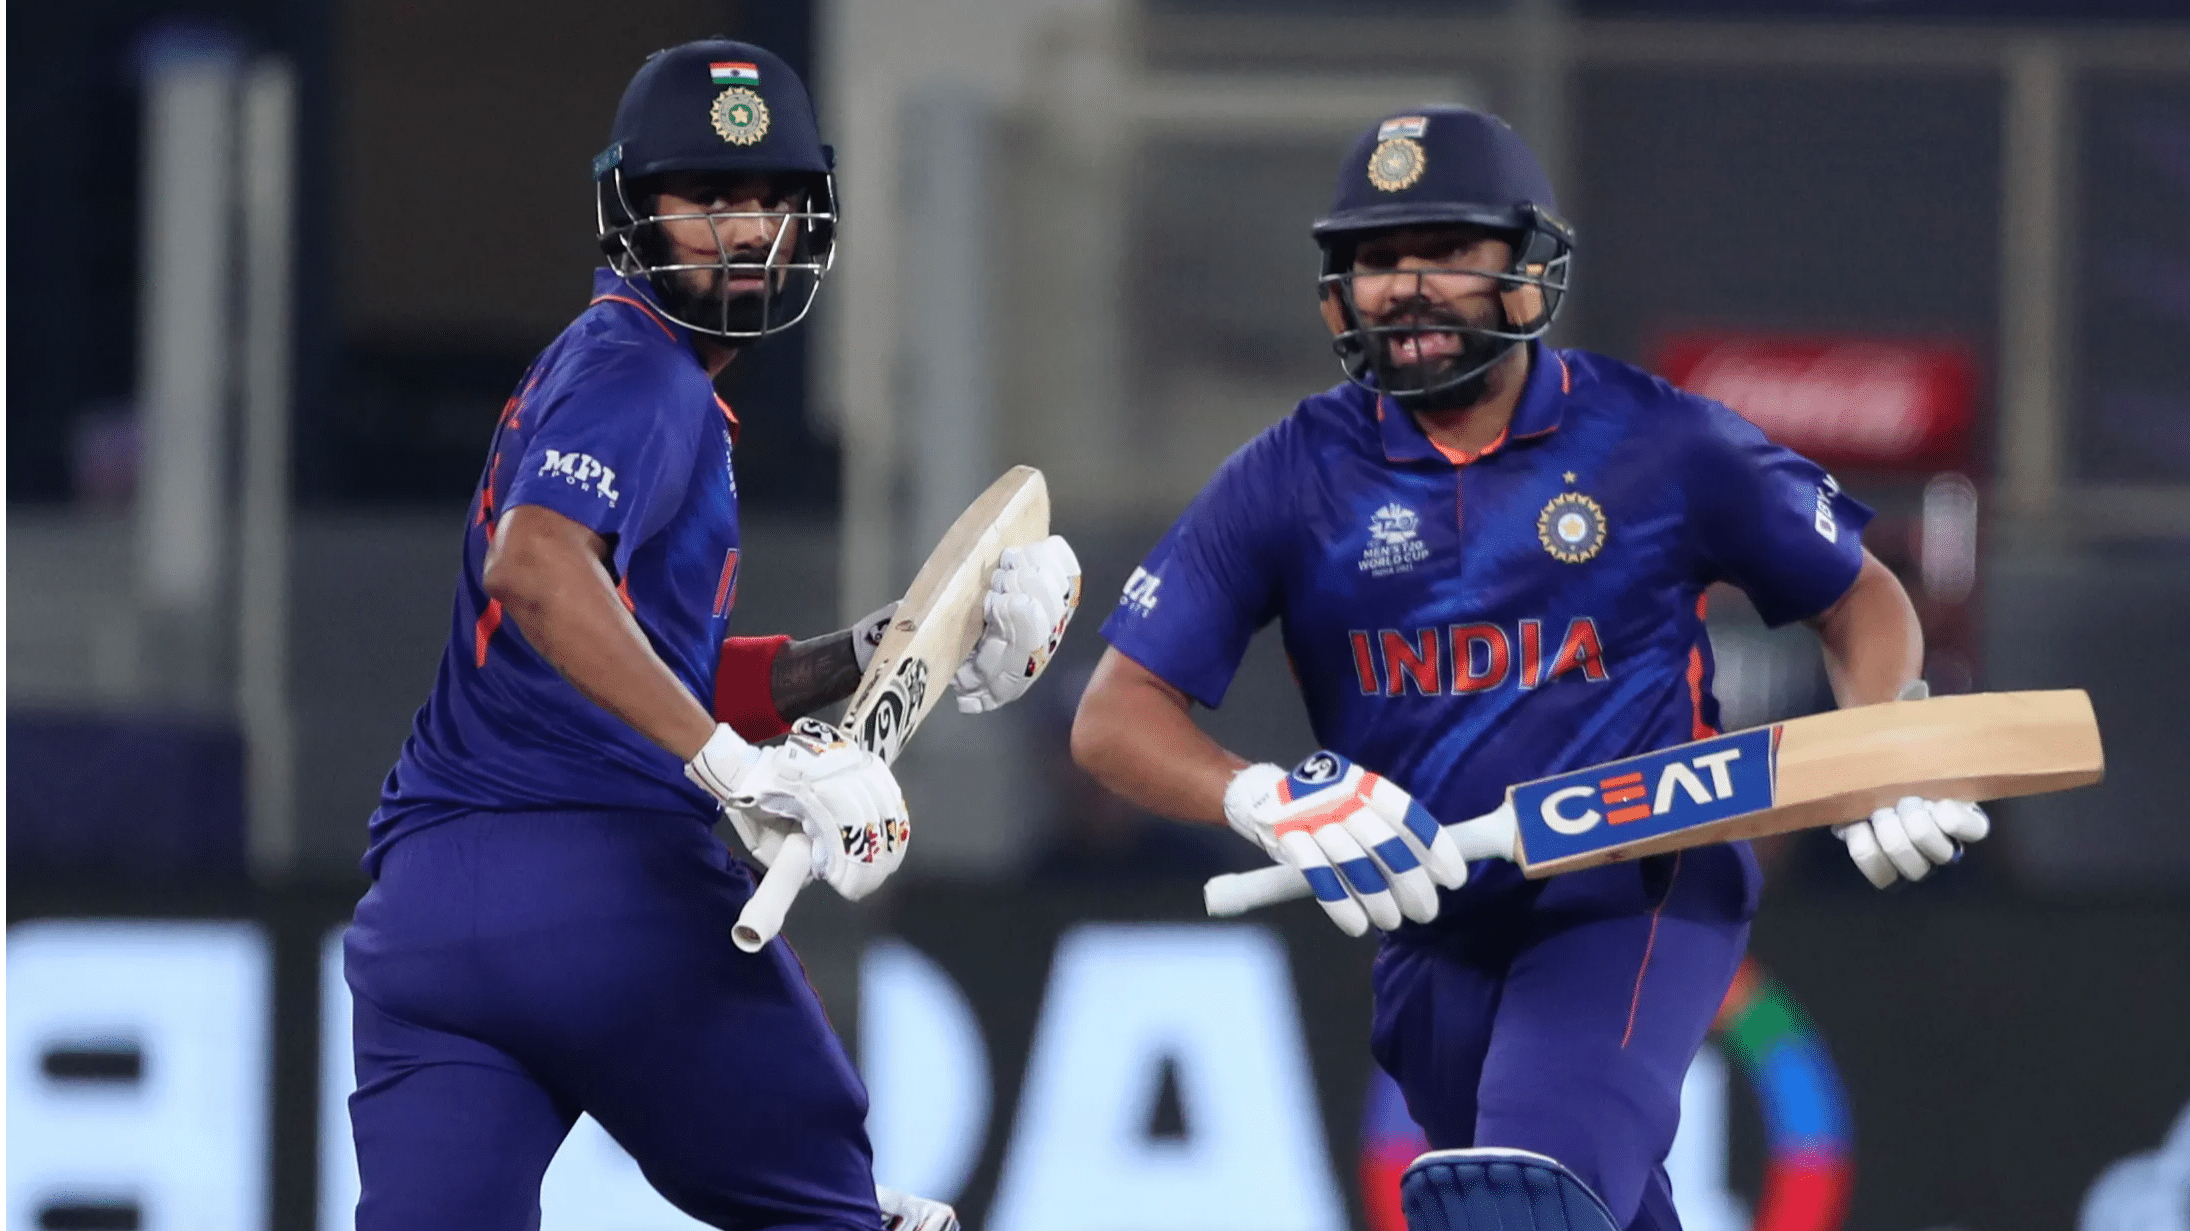 BCCI announce Rohit as captain, Rahul his deputy for New Zealand T20I series